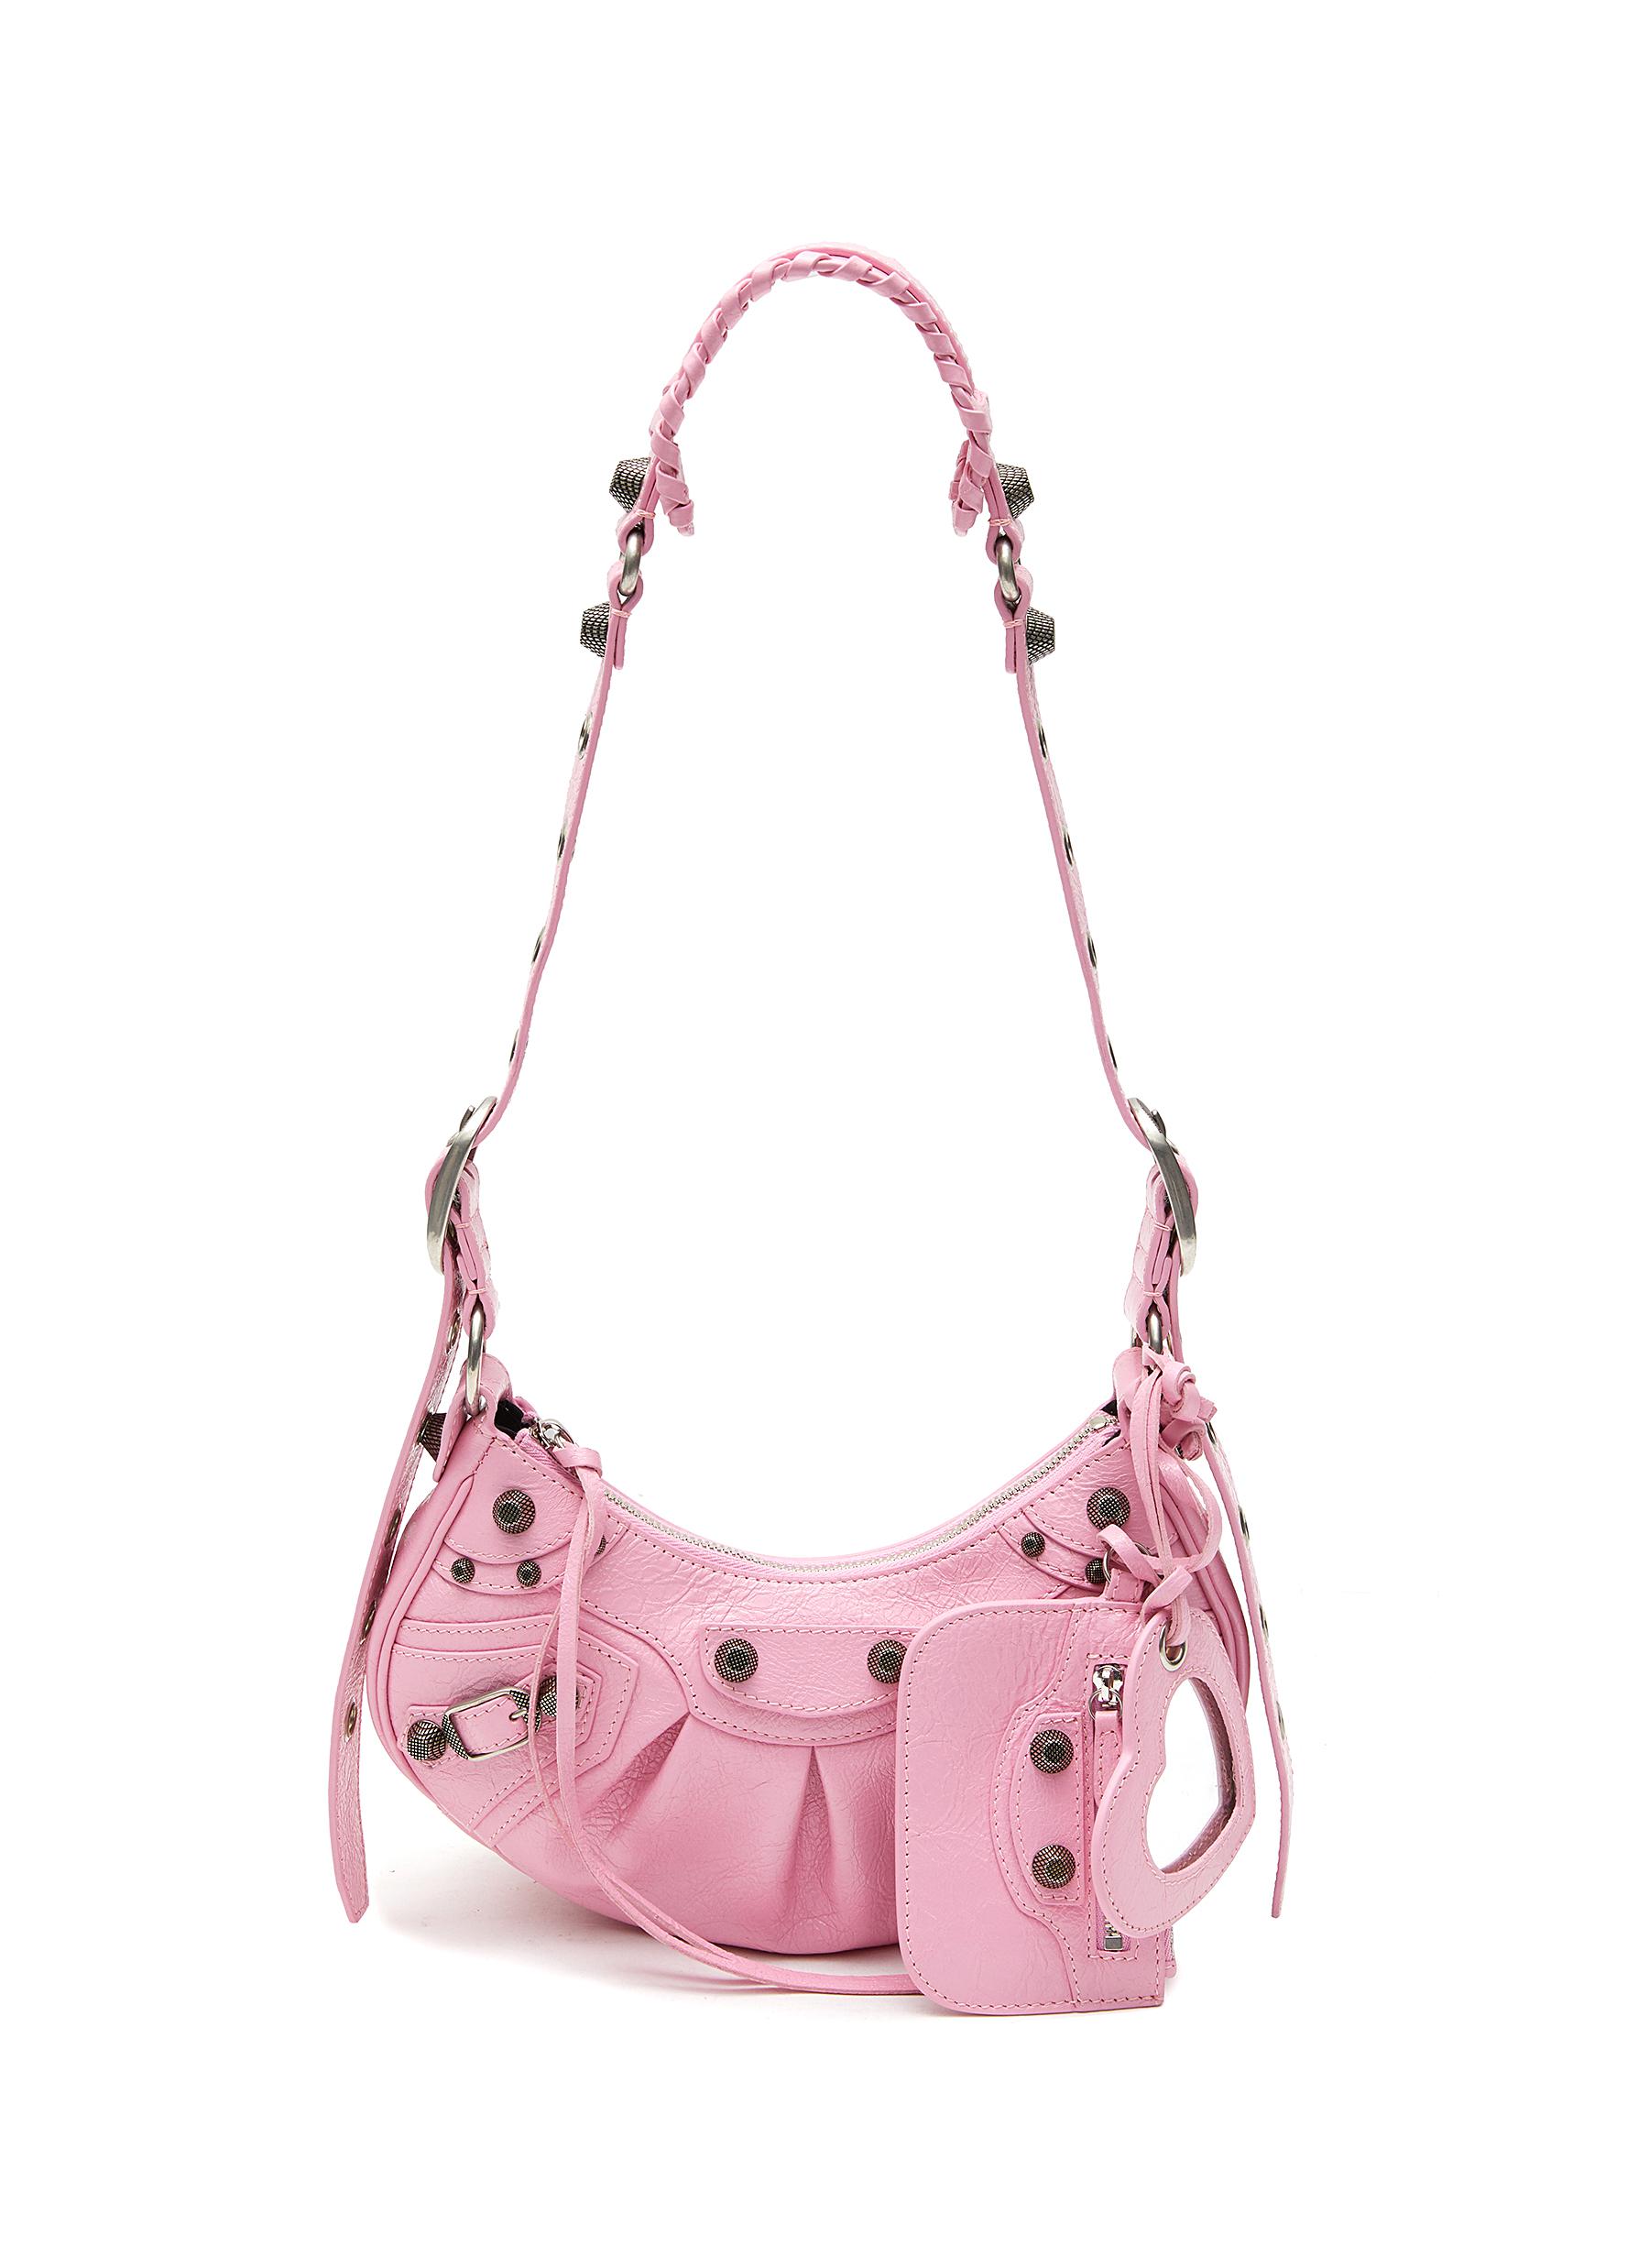 'Le Cagole' Extra Small Leather Shoulder Bag